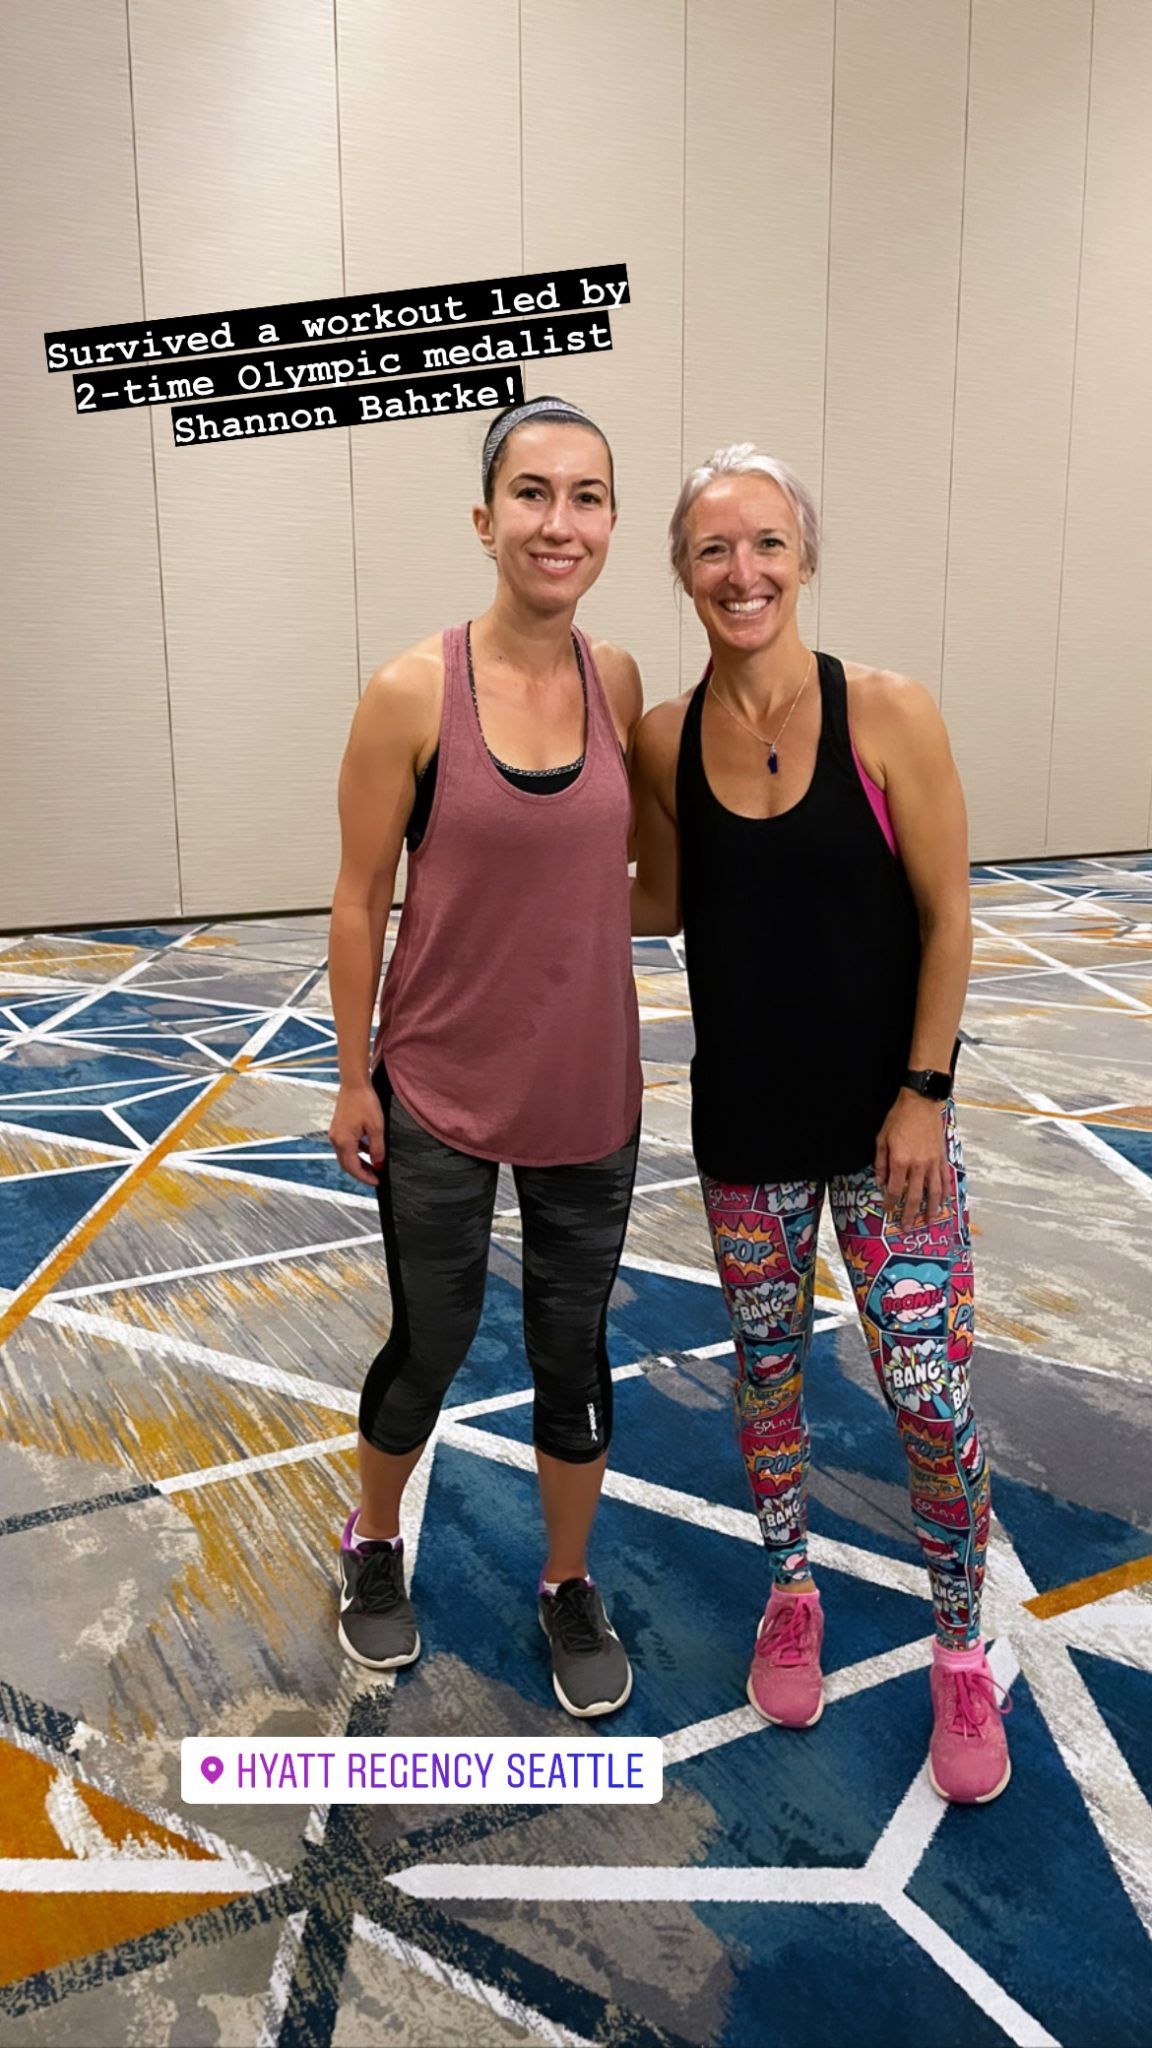 Wore my Shein tank top recently to a work out led by Olympic Silver Medalist Shannon Bahrke!